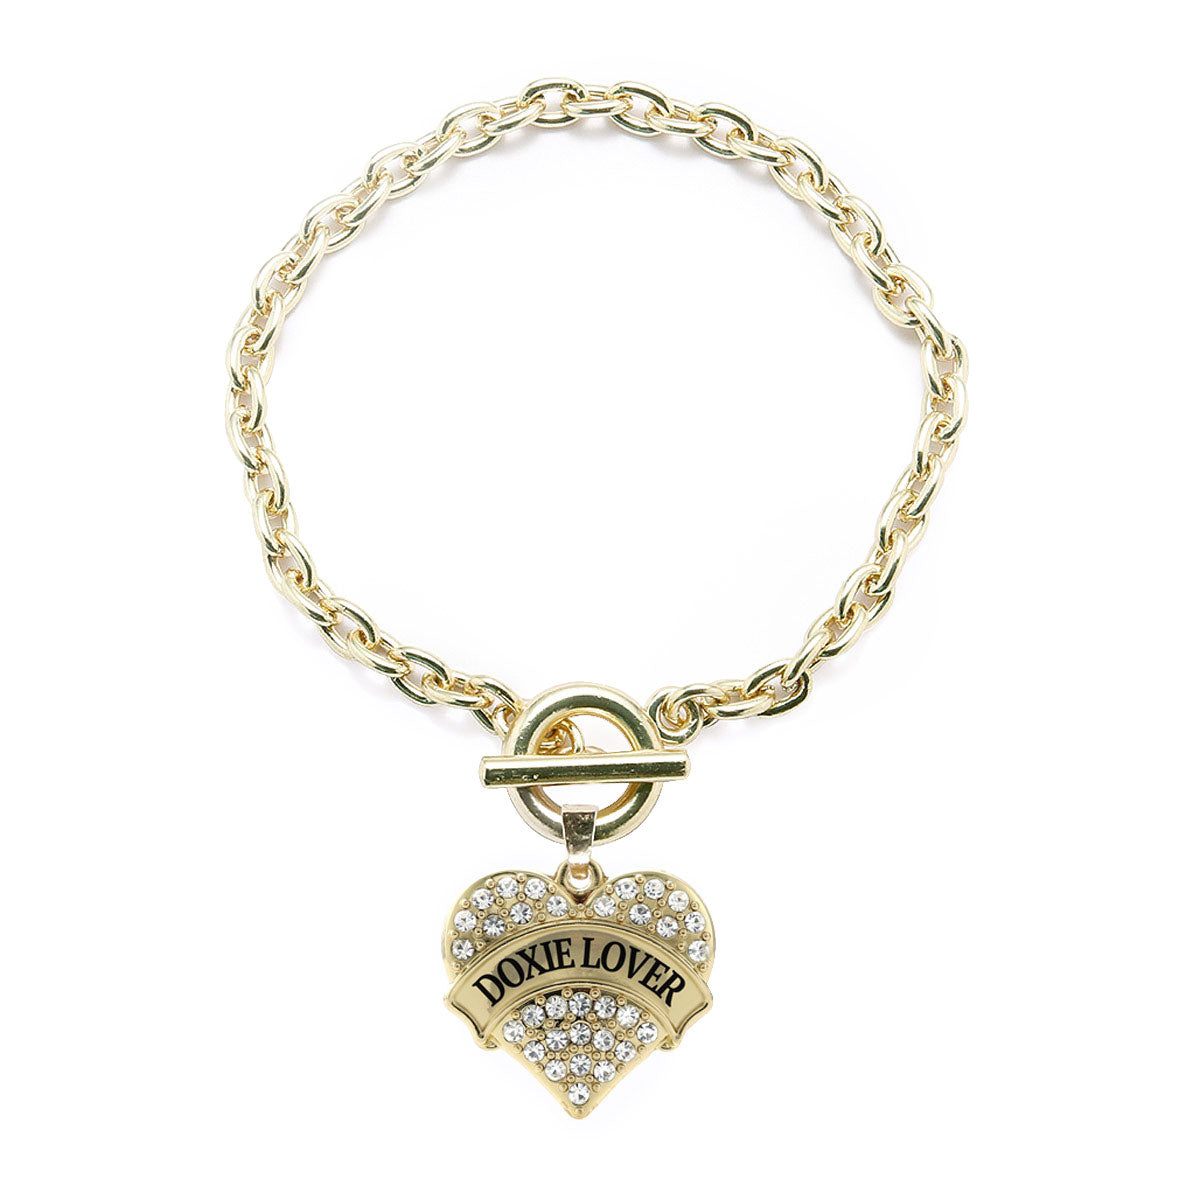 Gold Doxie Lover Pave Heart Charm Toggle Bracelet